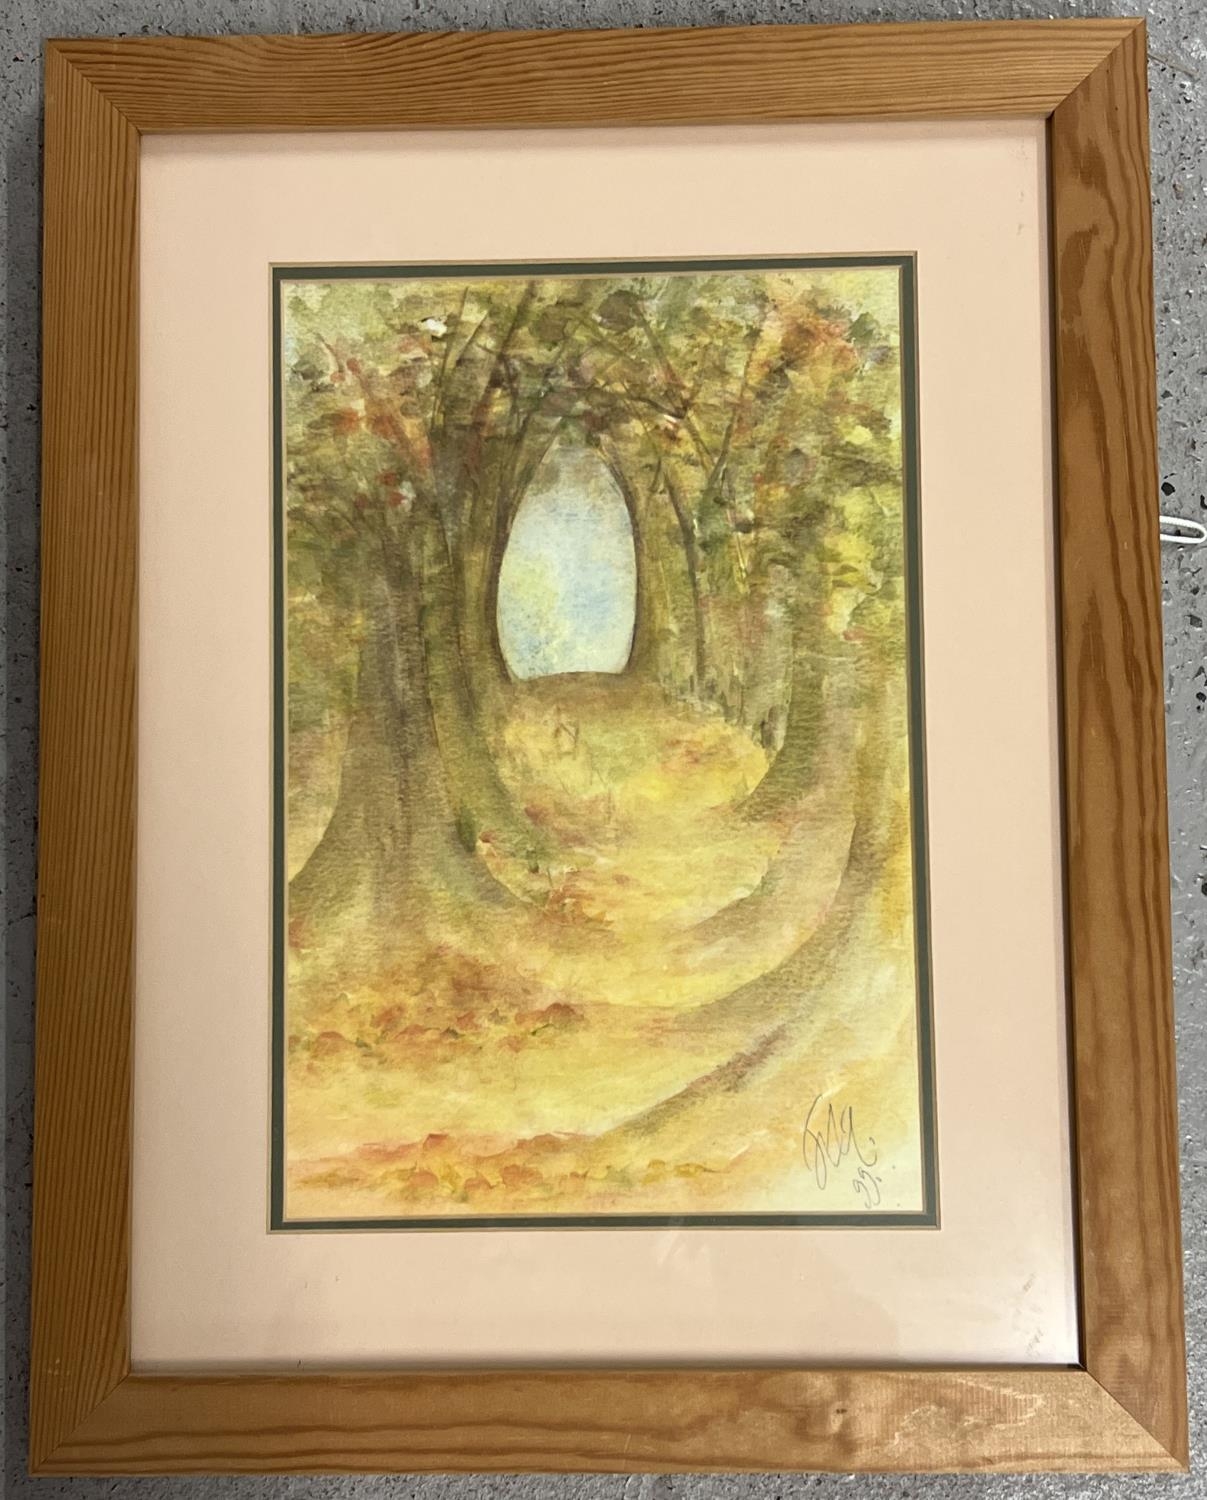 A framed and glazed watercolour of autumnal trees by Jayne Gaze, dated 1999. Signed to bottom right.